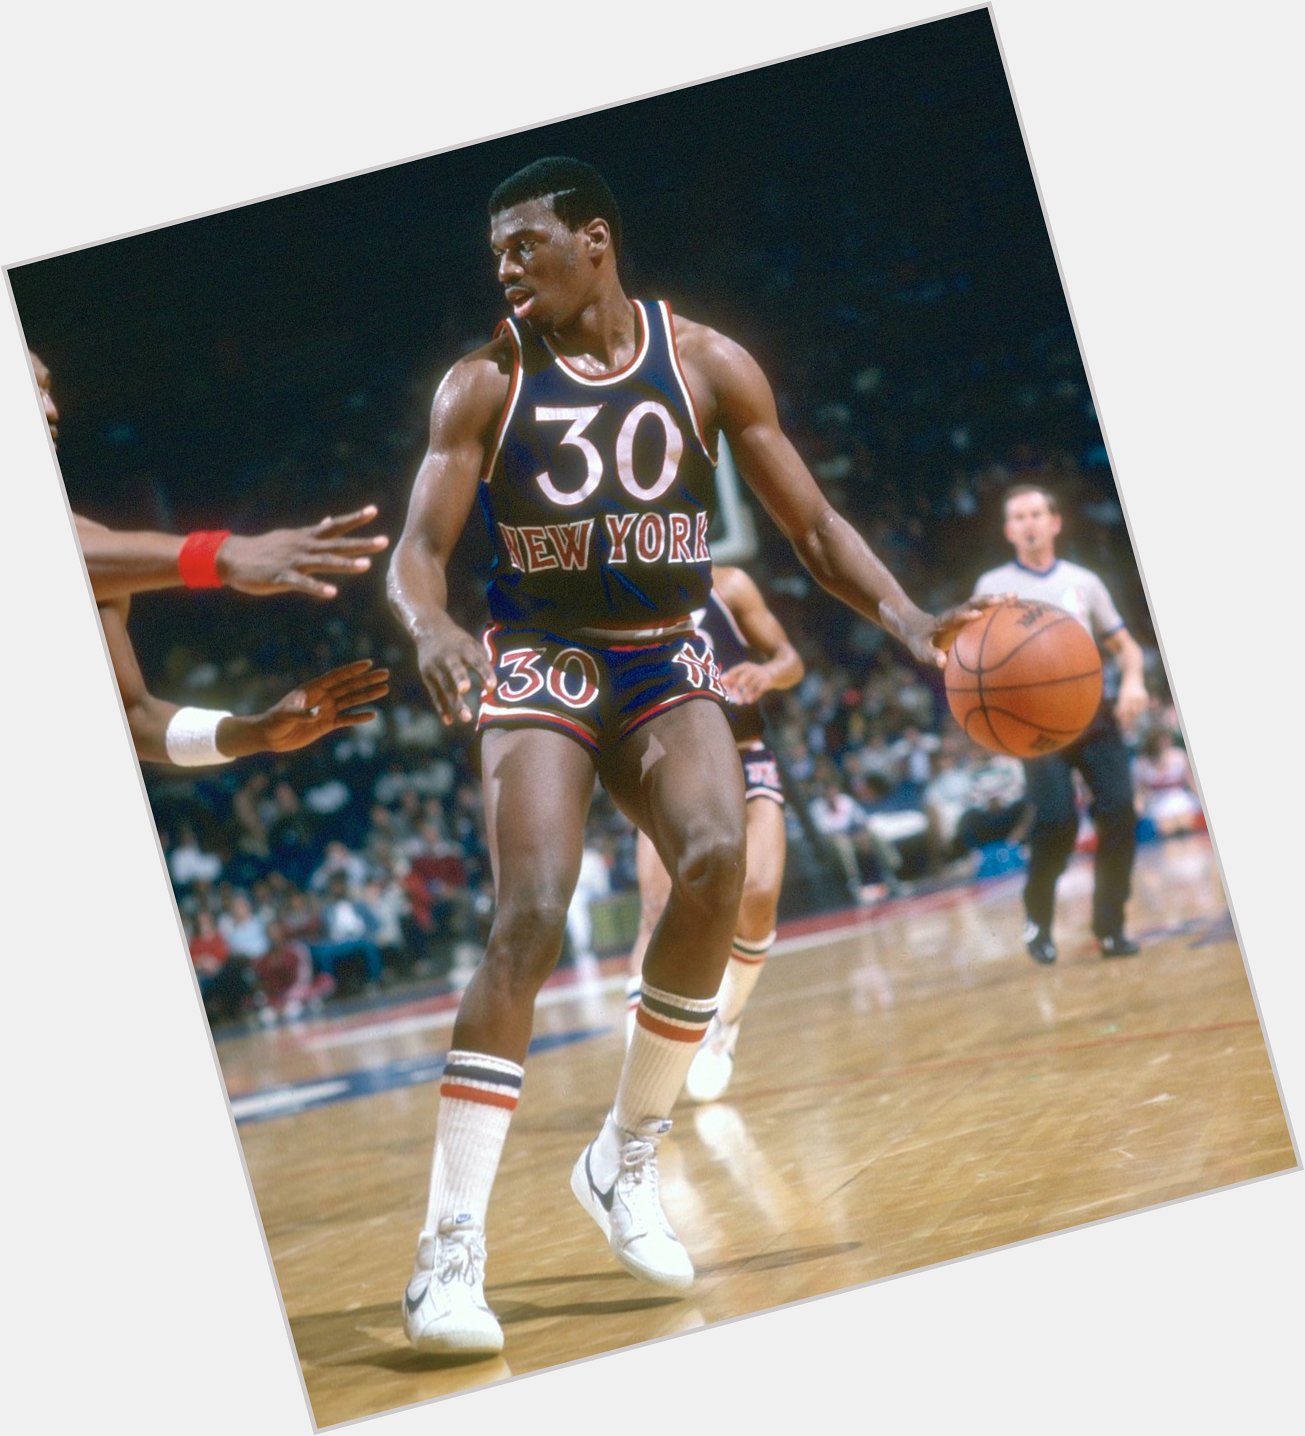 To wish Bernard King a Happy Birthday.   : Focus on Sport/Getty Images 